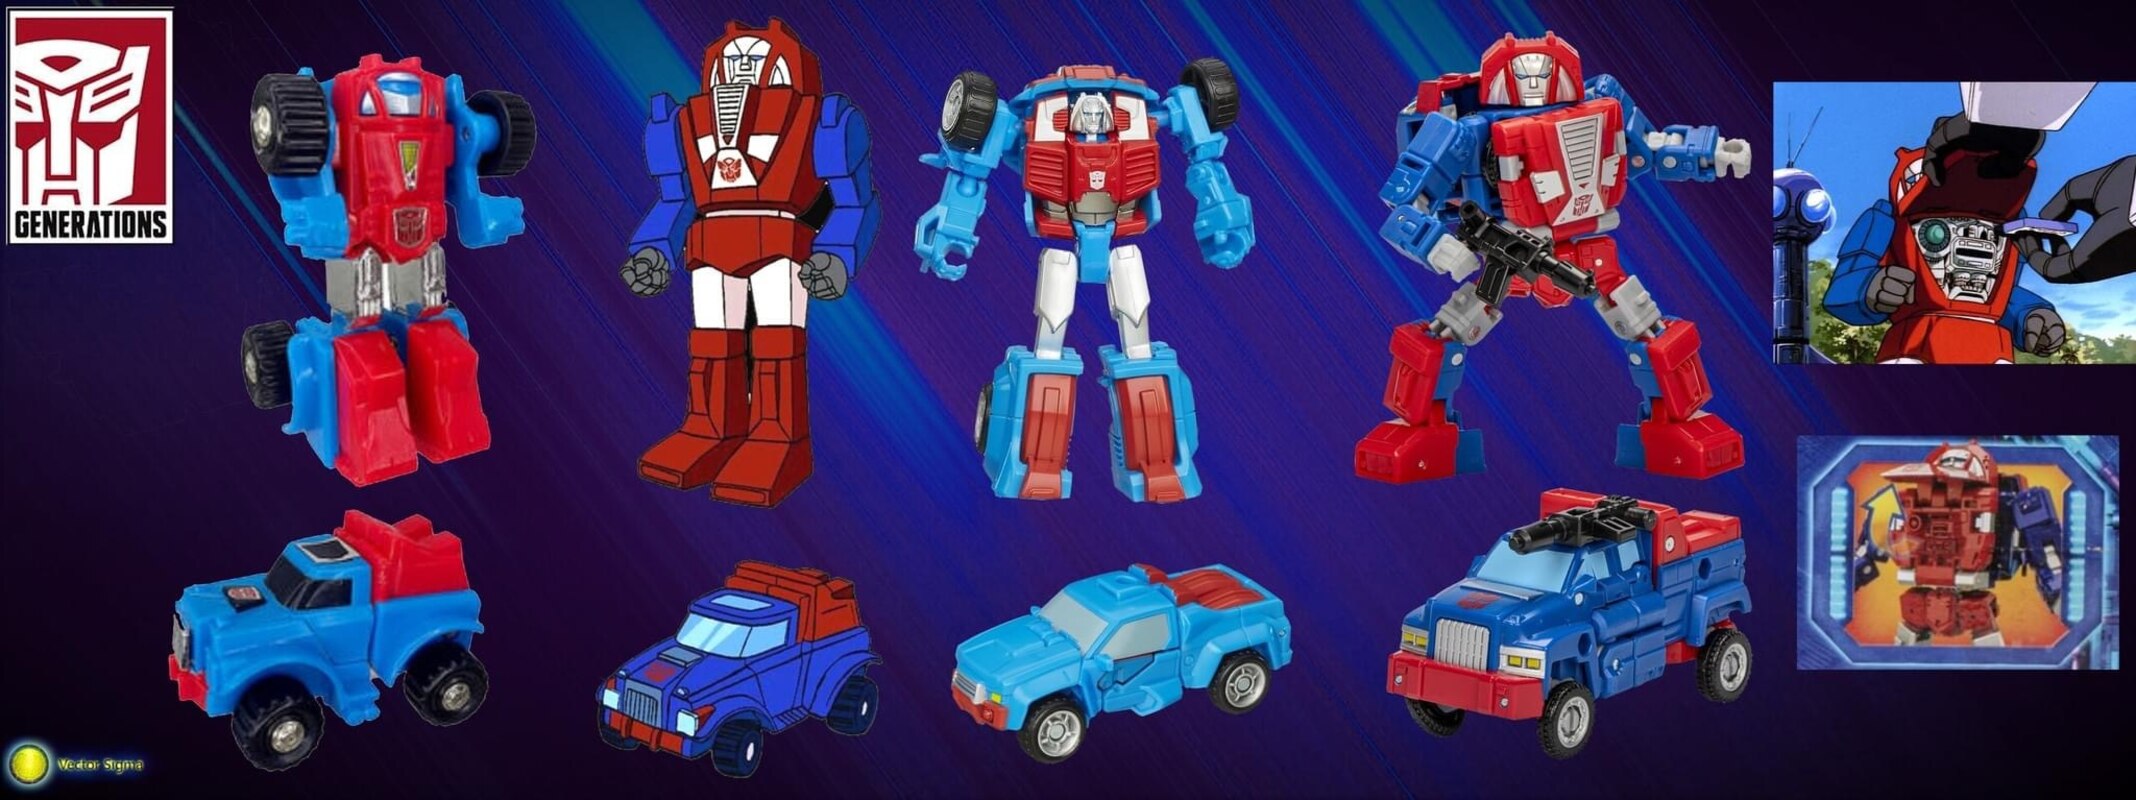 Image of Transformers Gears Through The Years from G1 Minibot to Legacy United Deluxe__scaled_...jpg